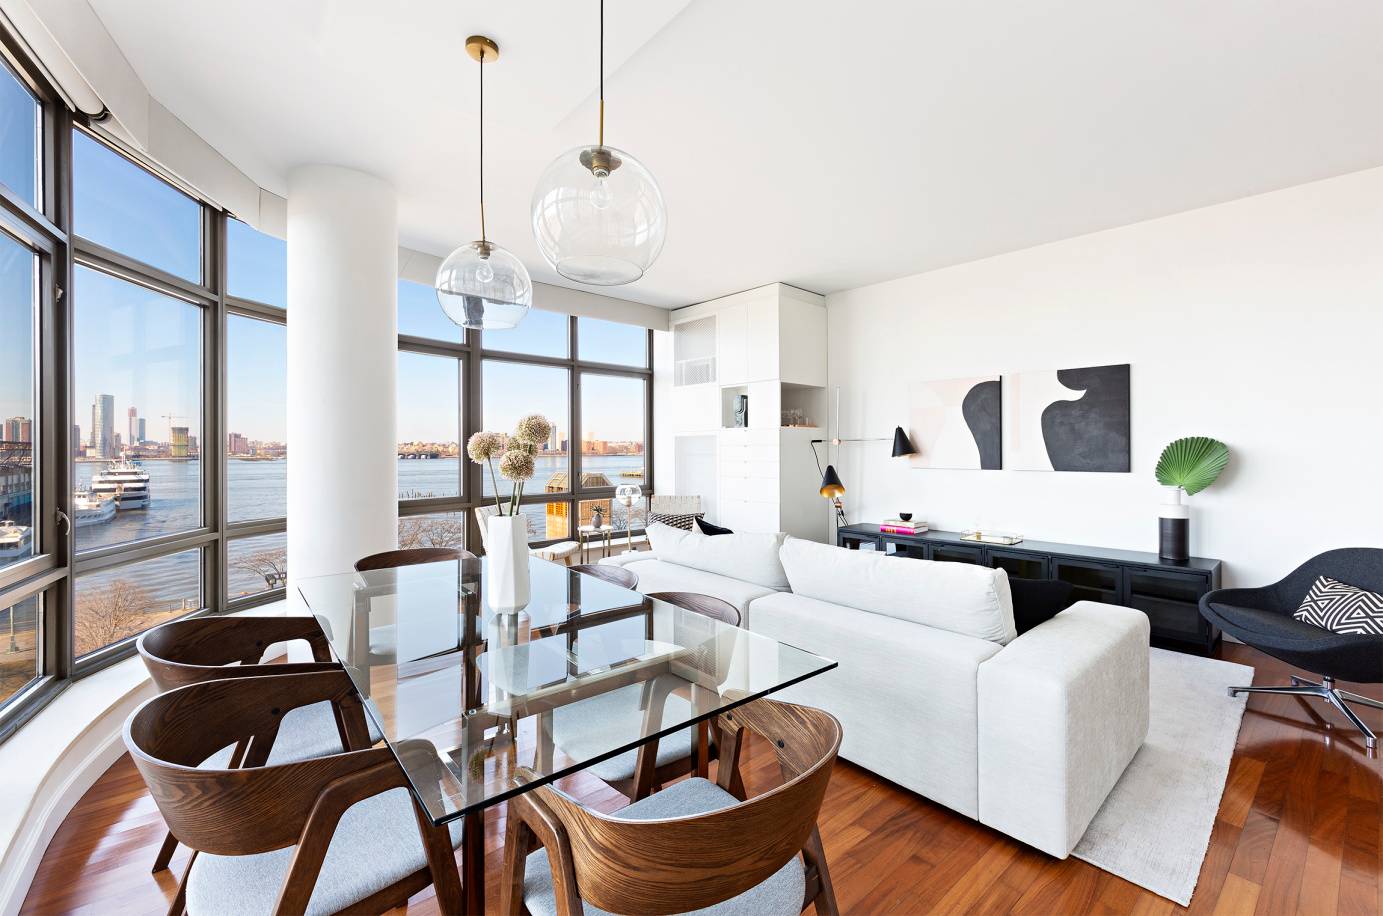 West Village Sunsets Savor direct Western views of the Hudson River and park from the living room of this elegant, oversized condo designed by Andres Escobar.